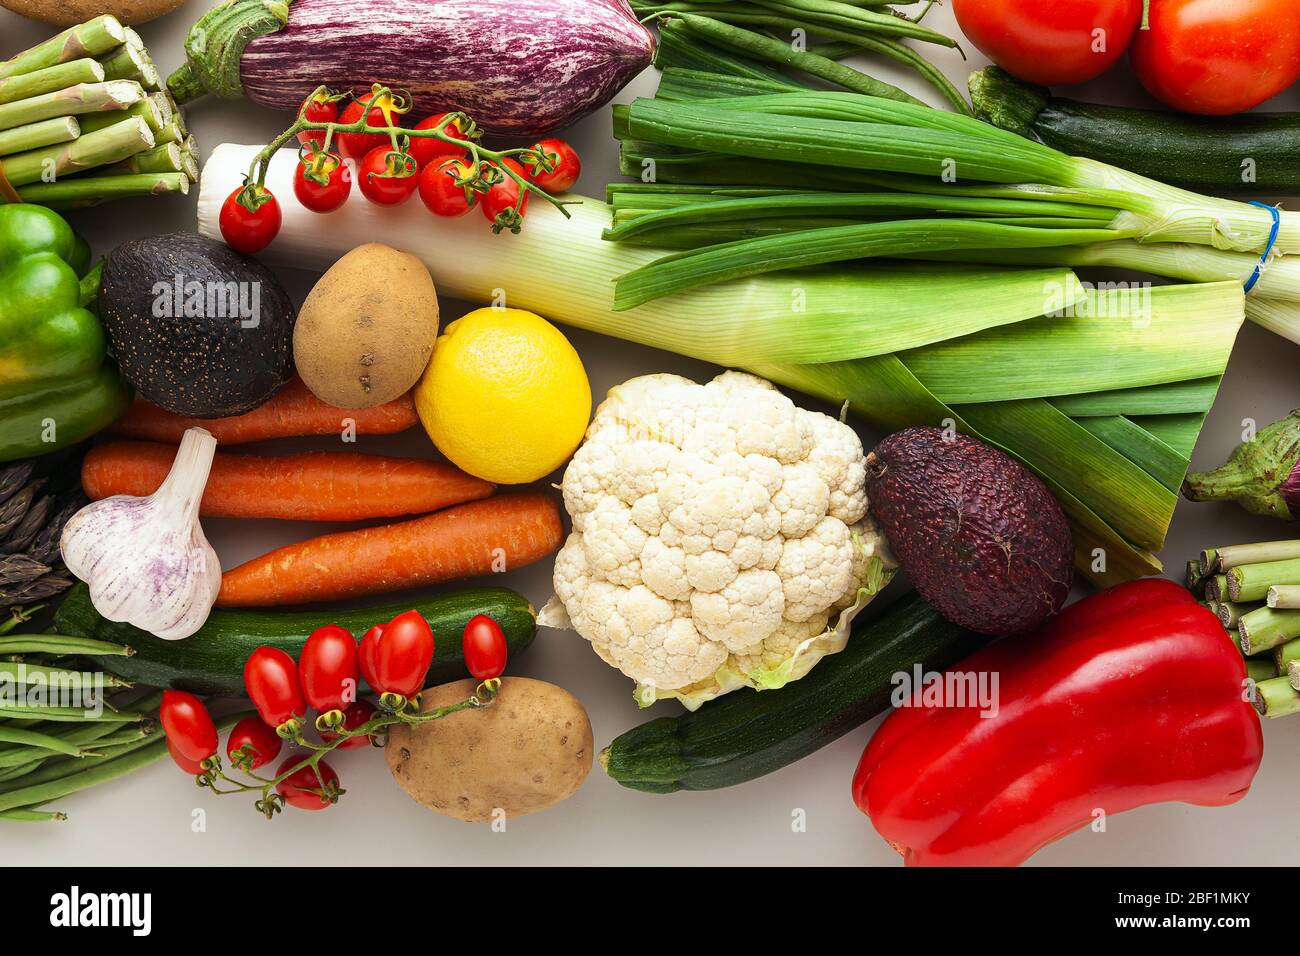 many varied colored fresh vegetables for home delivery. banner advertising Stock Photo